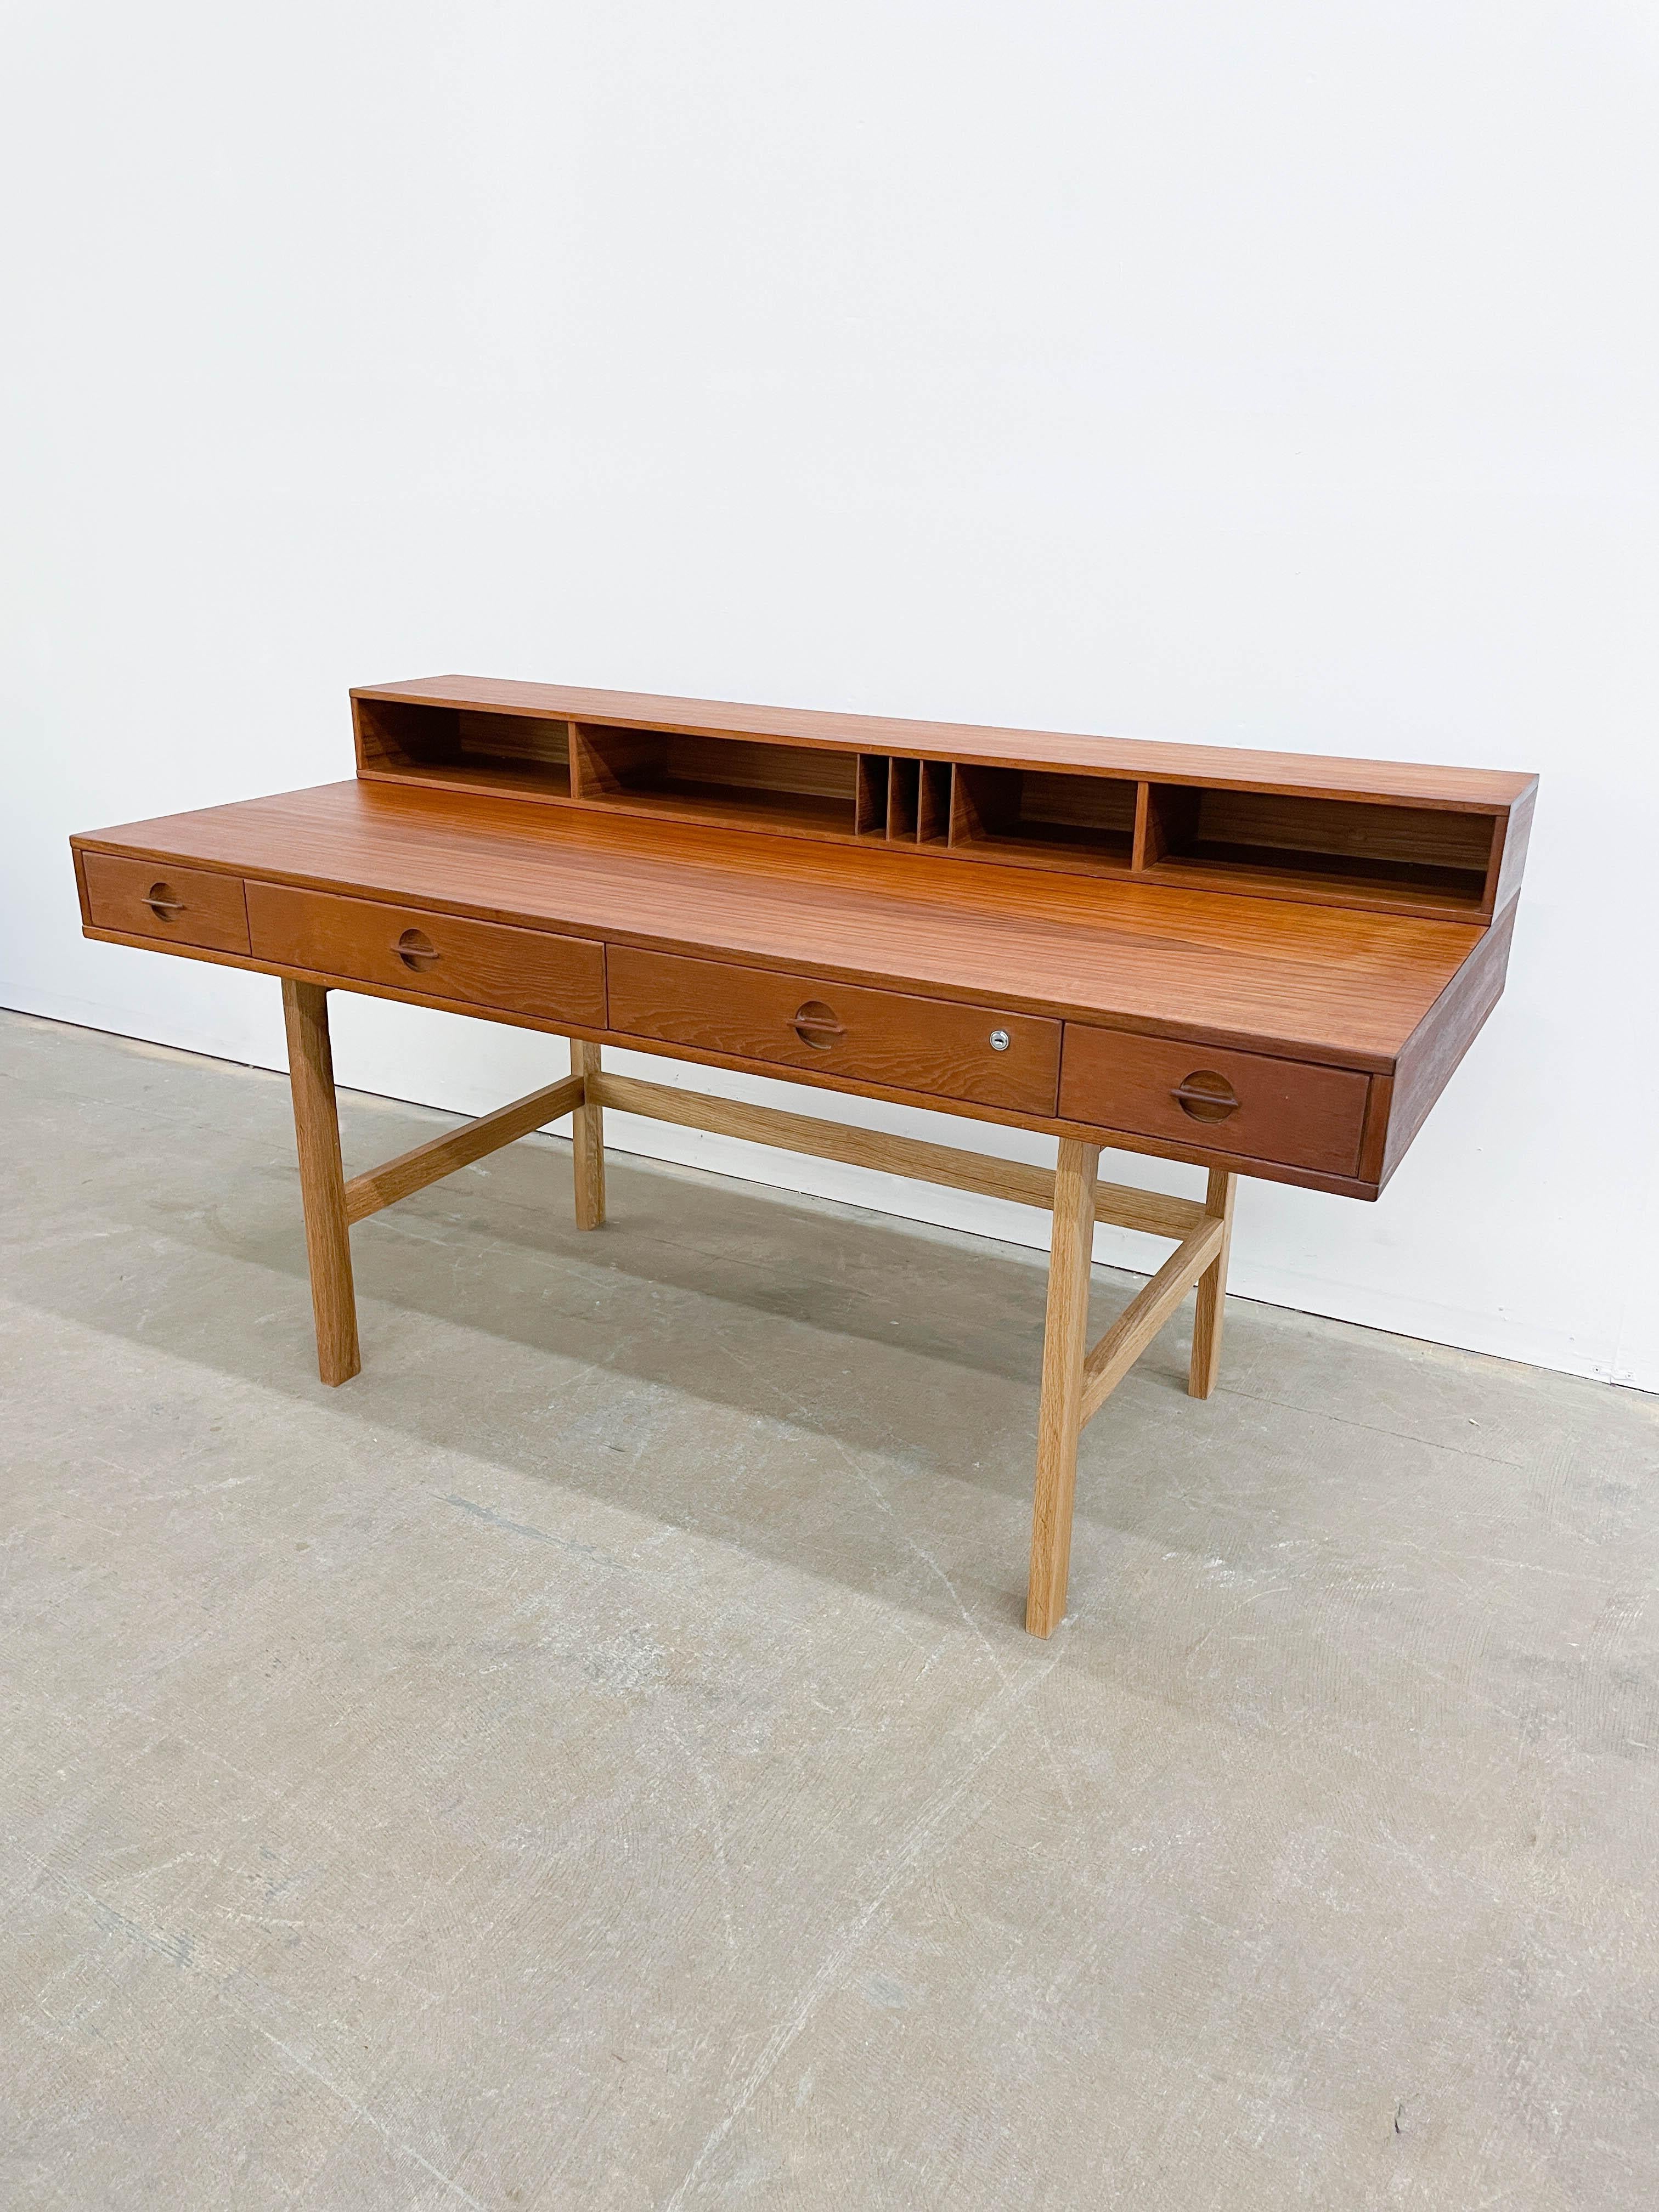 This is a stylish 1970s Danish Modern Teak flip-top desk by Peter Lovig Nielsen. Angular and architectural, this generous desk offers excellent storage in the four front drawers and seven top cubbies in varied sizes. It also transforms with the